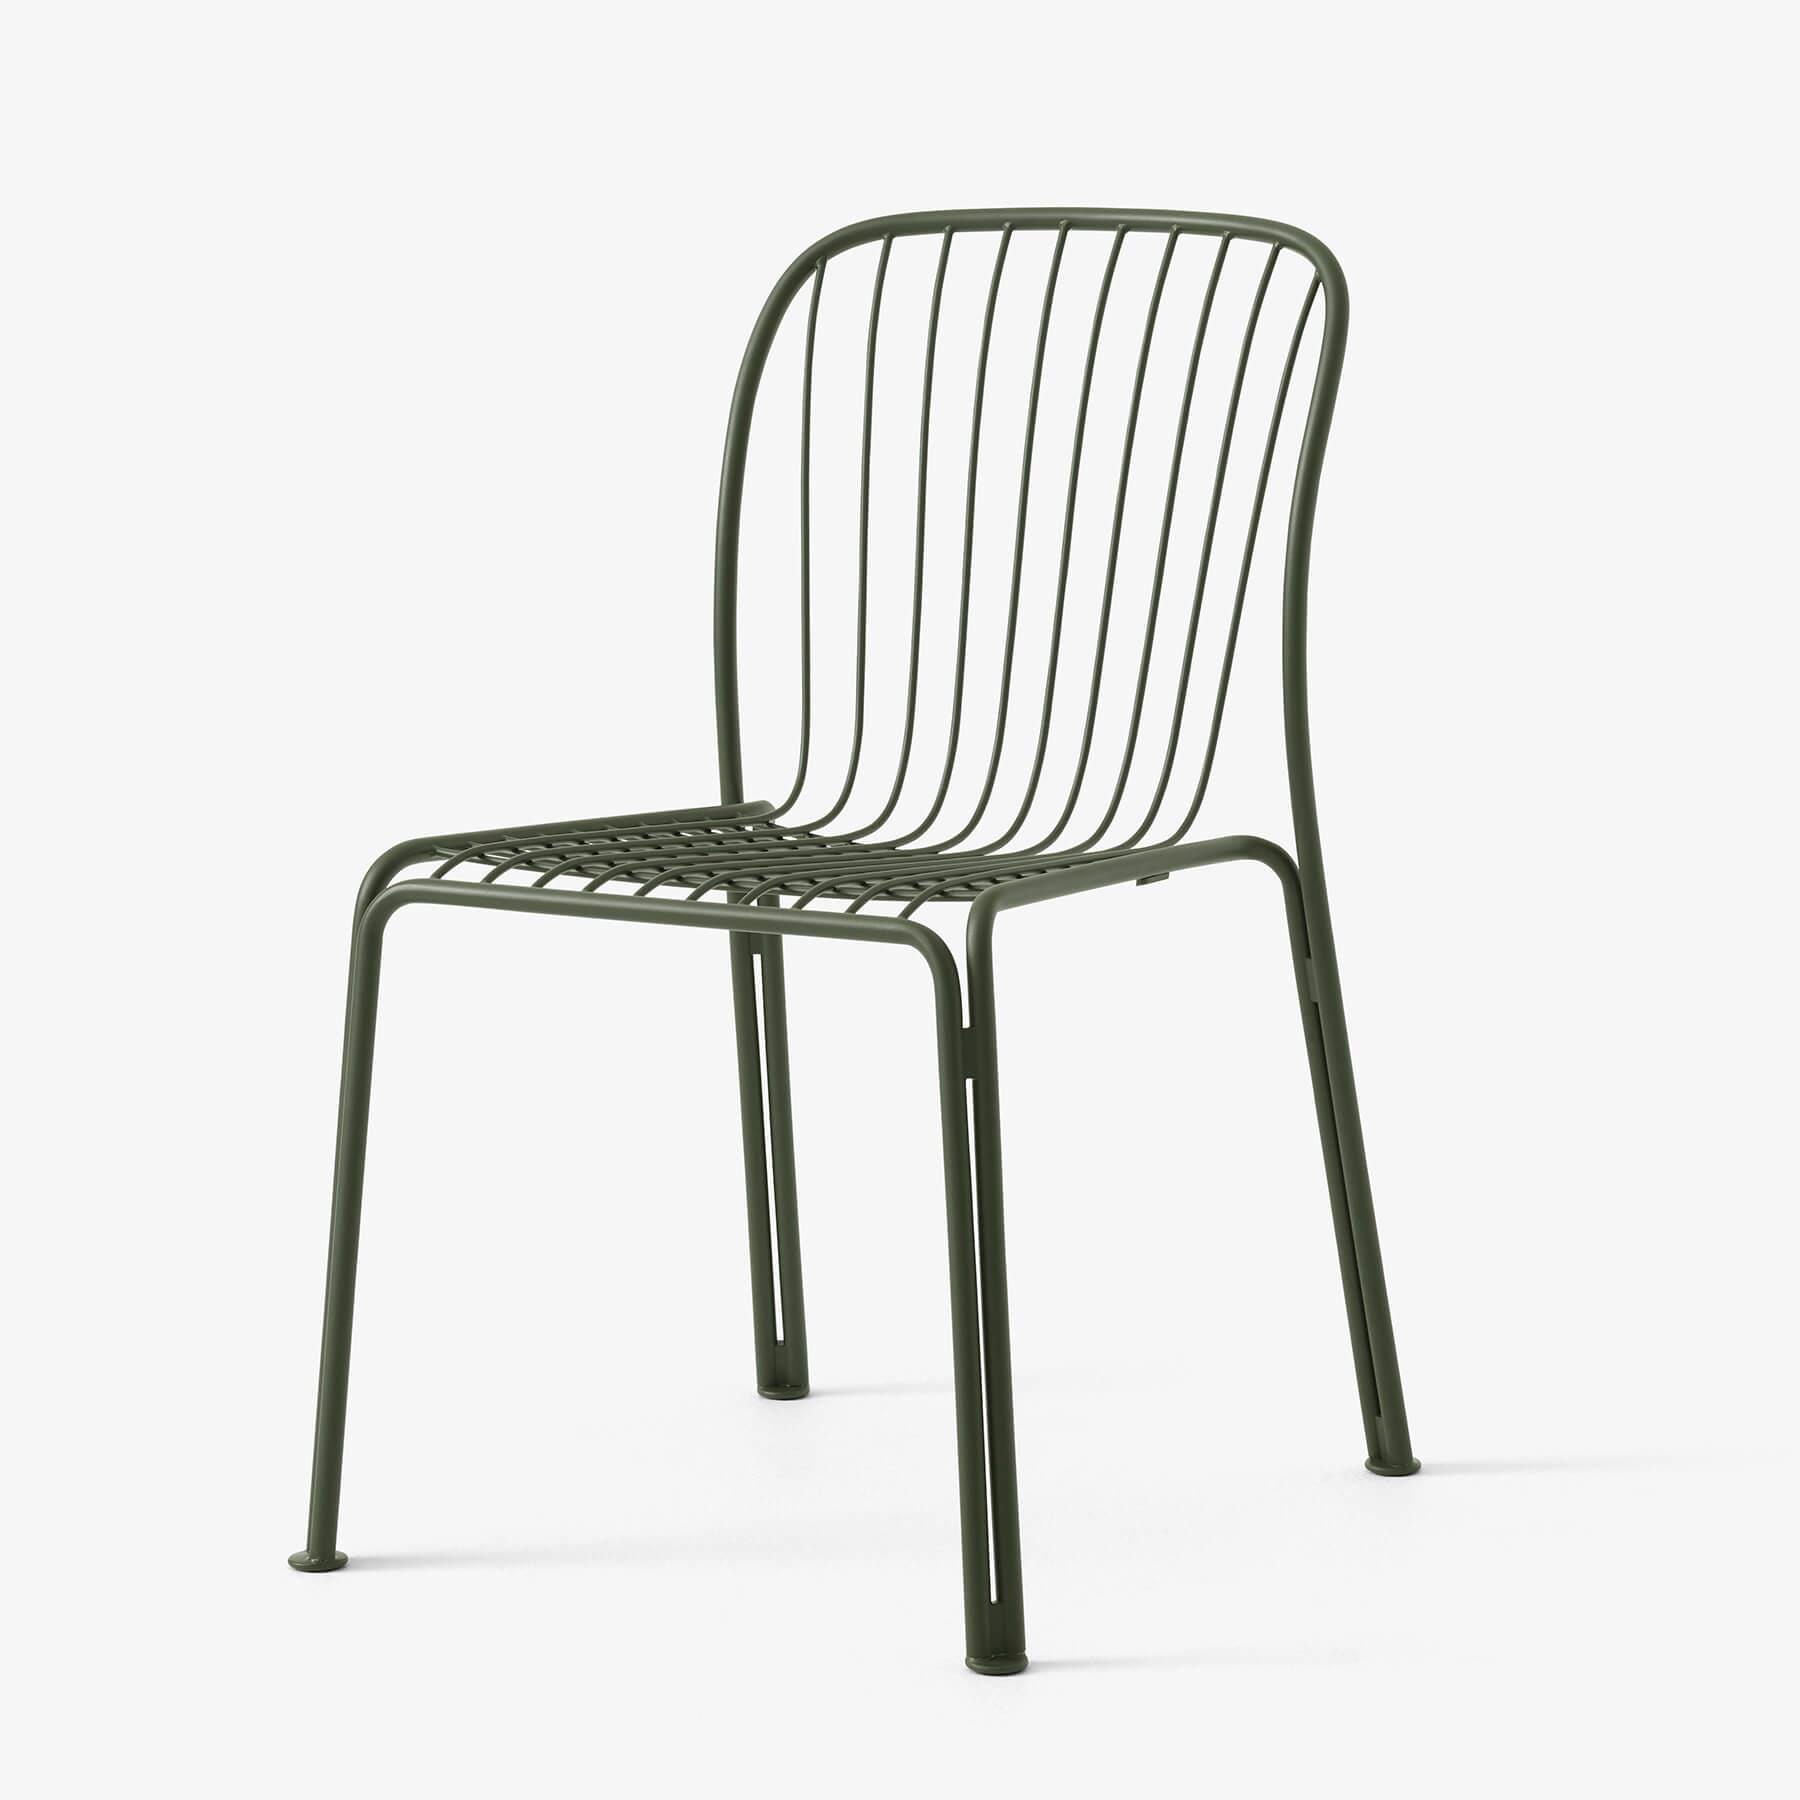 Tradition Thorvald Sc94 Outdoor Chair Bronze Green